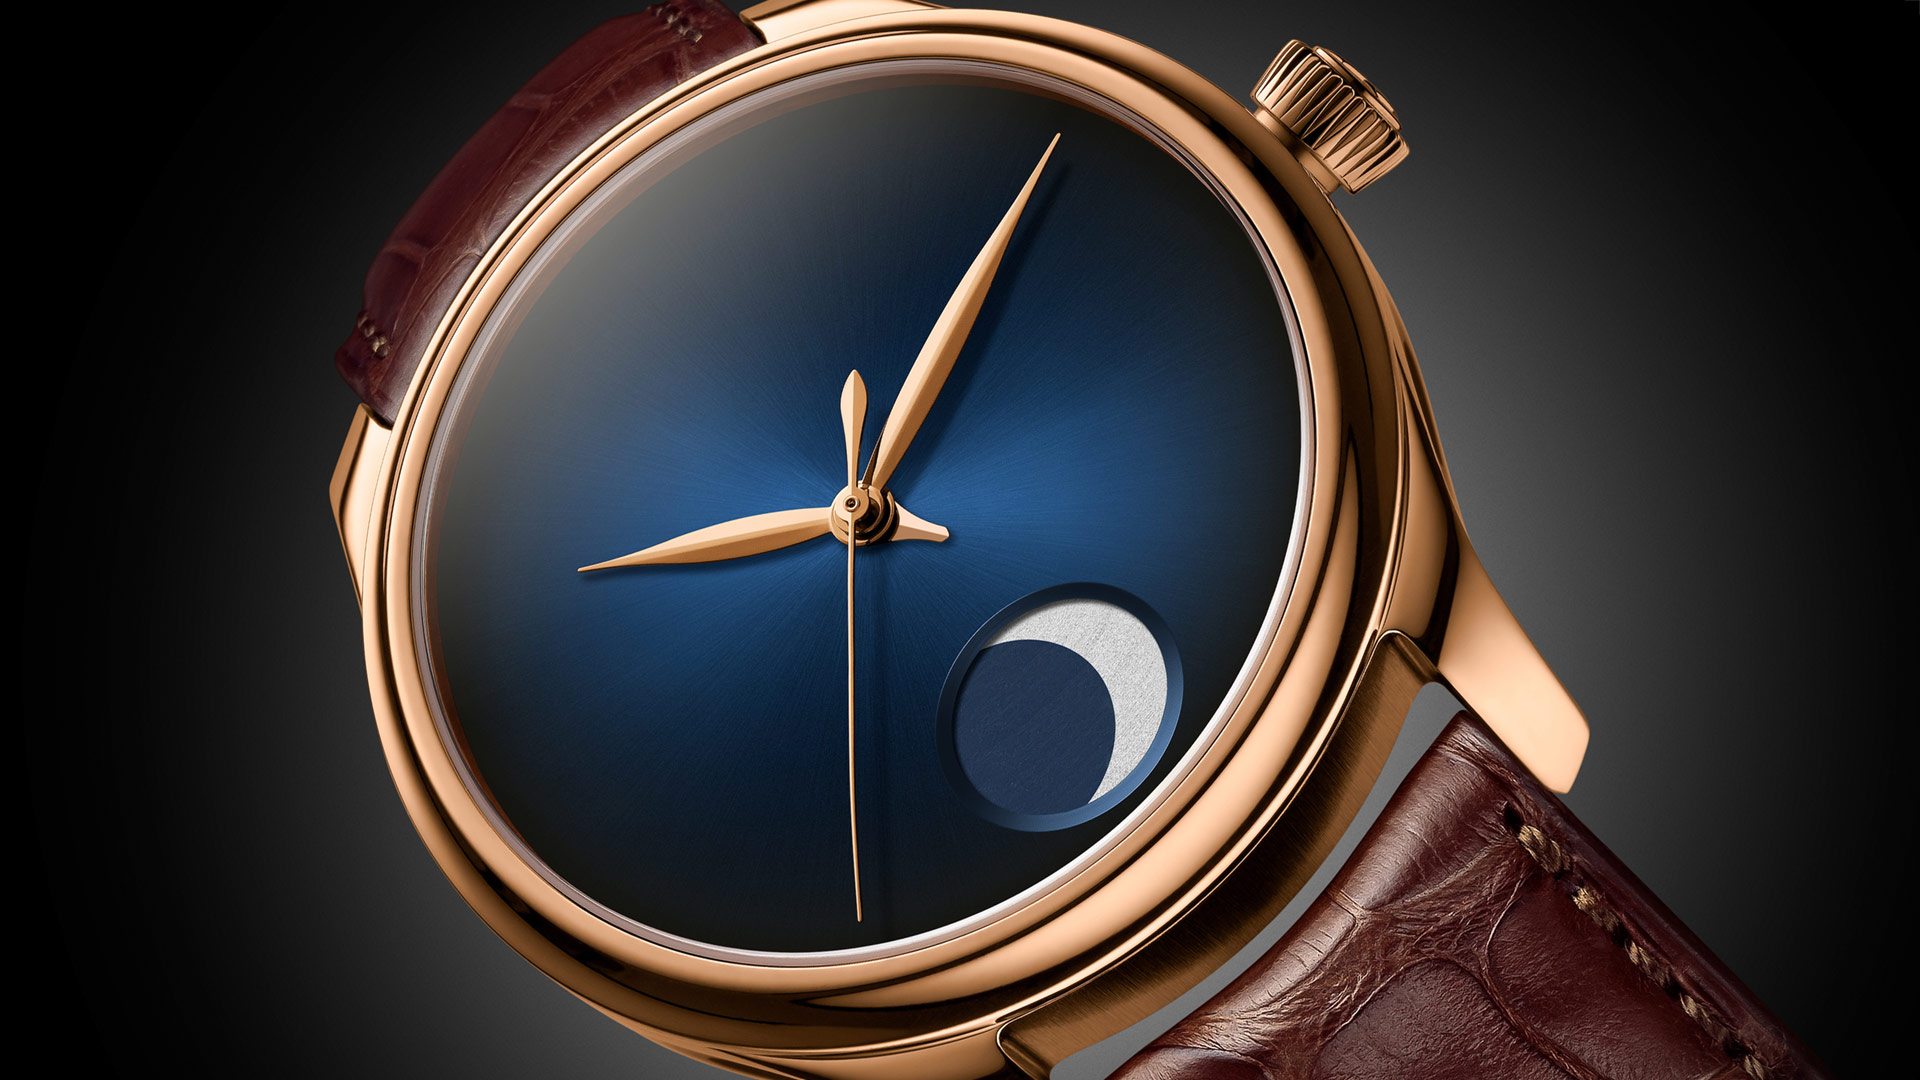 H. Moser & Cie. Endeavour Perpetual Moon Concept Watch